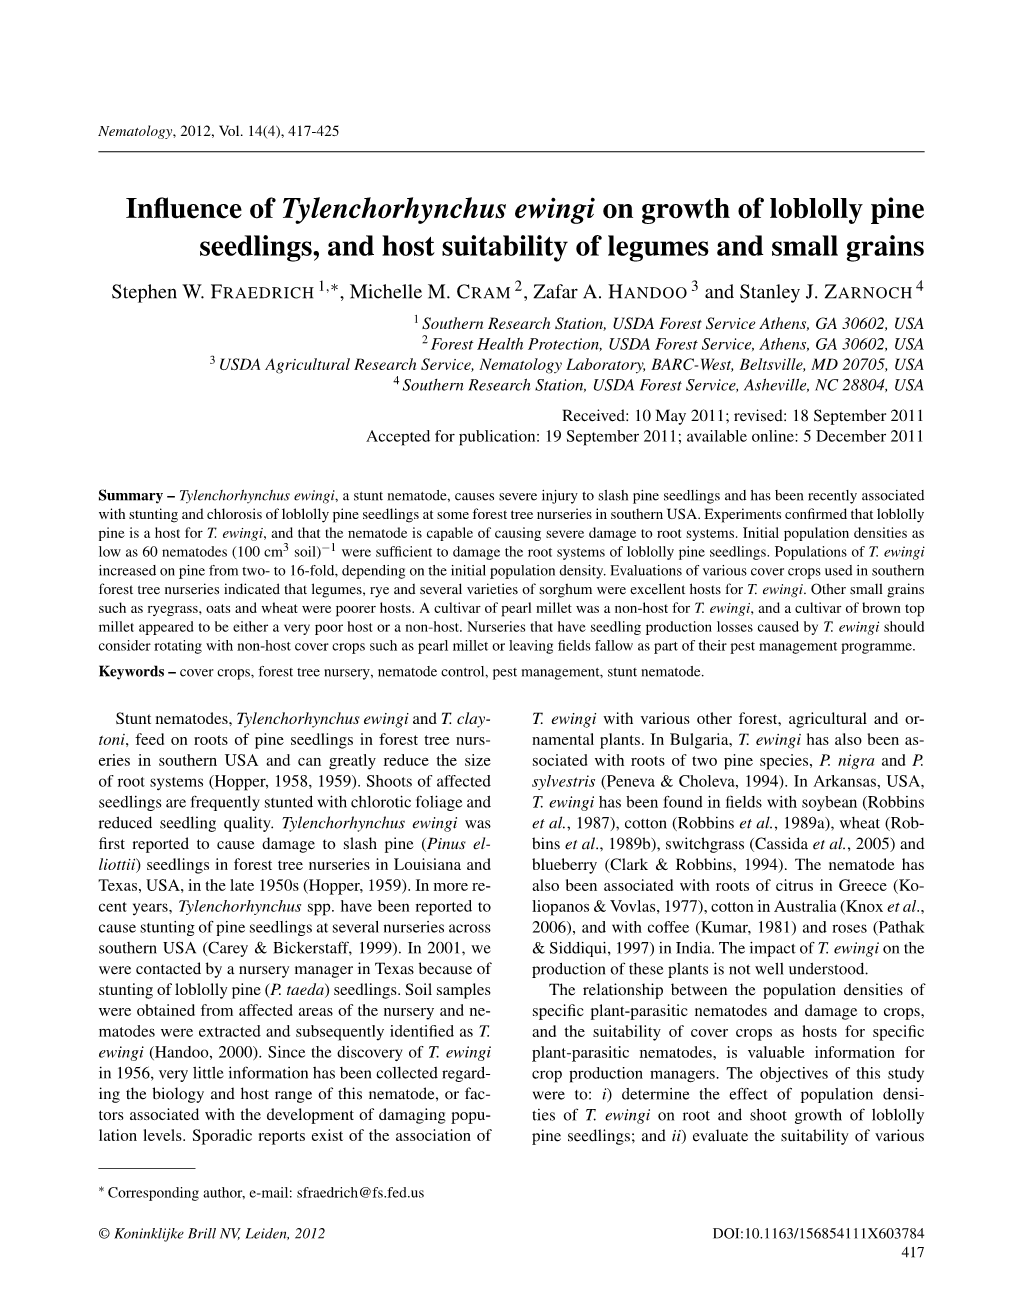 Influence of Tylenchorhynchus Ewingi on Growth of Loblolly Pine Seedlings, and Host Suitability of Legumes and Small Grains